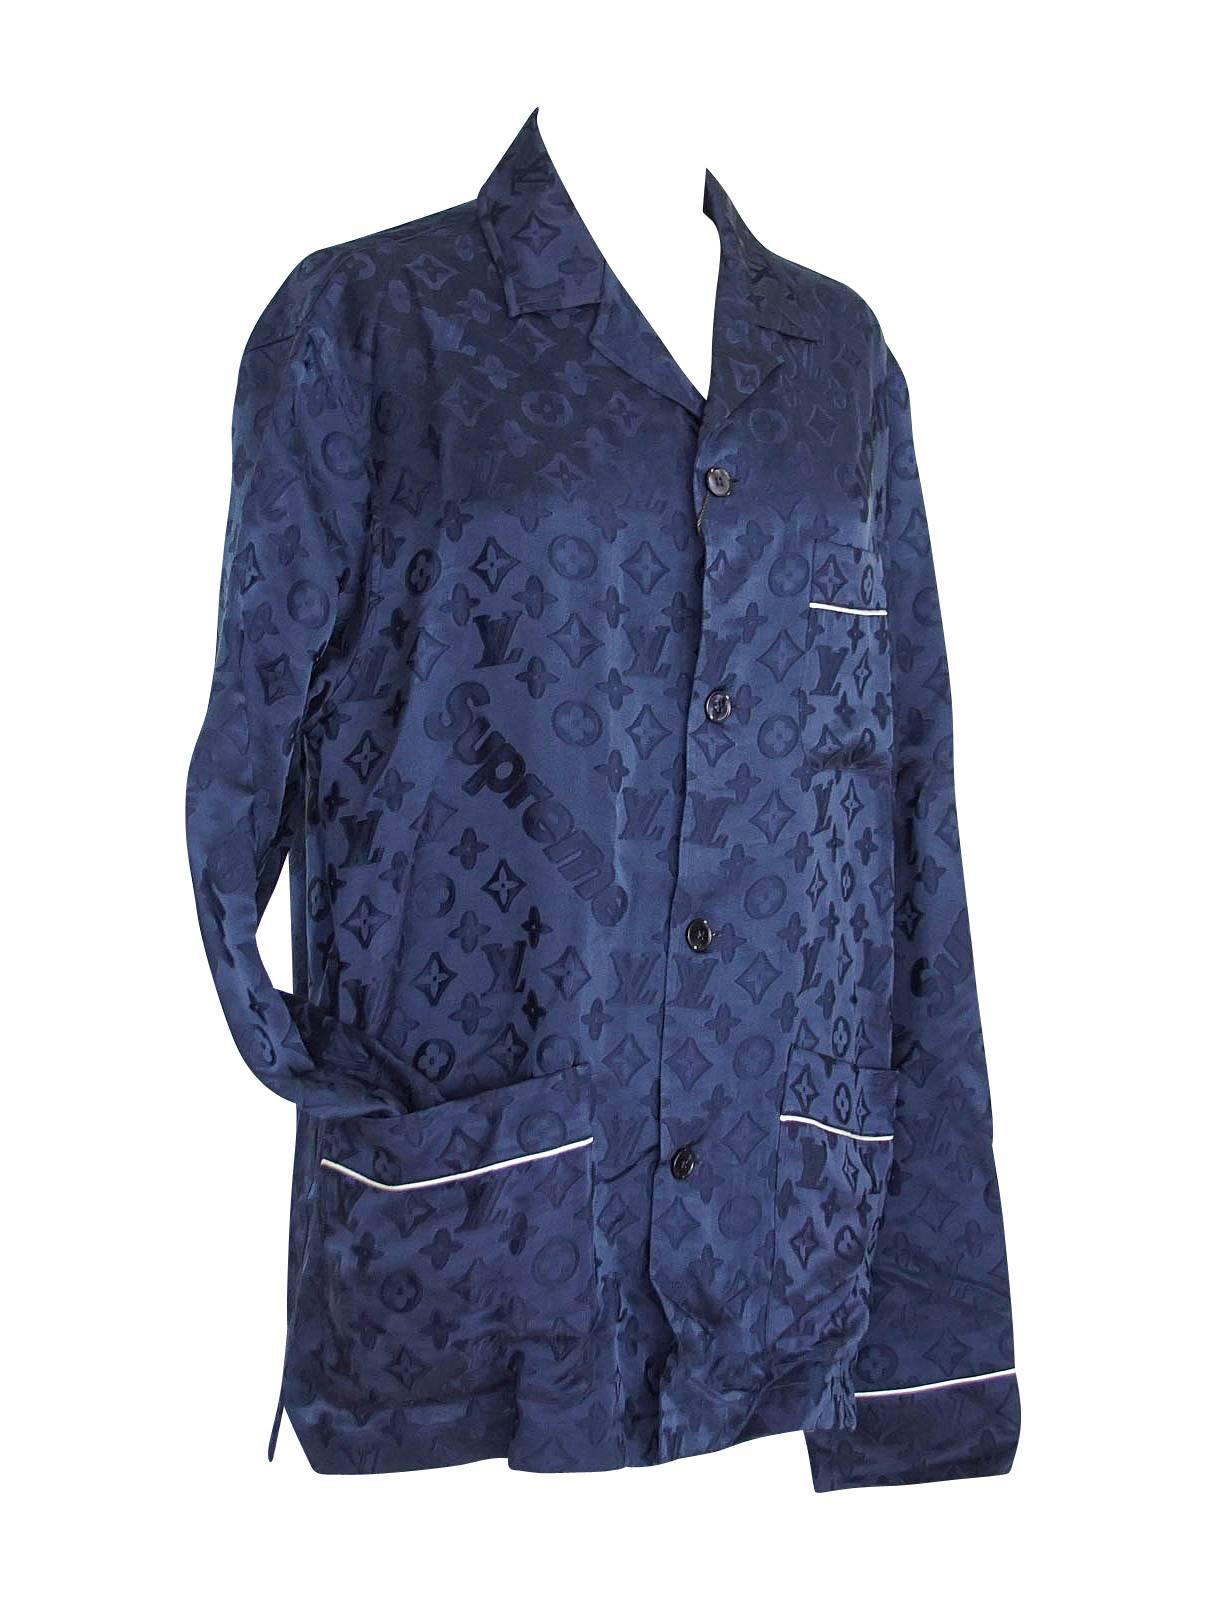 Guaranteed authentic highly coveted and sought after Louis Vuitton Supreme X Very Limited Edition Pyjama Set Jacquard in Navy with white piping.
Louis Vuitton- as seen on Celine Dion at Paris Haute Couture in Paris.
Comes with LV gift box.
Fabric is